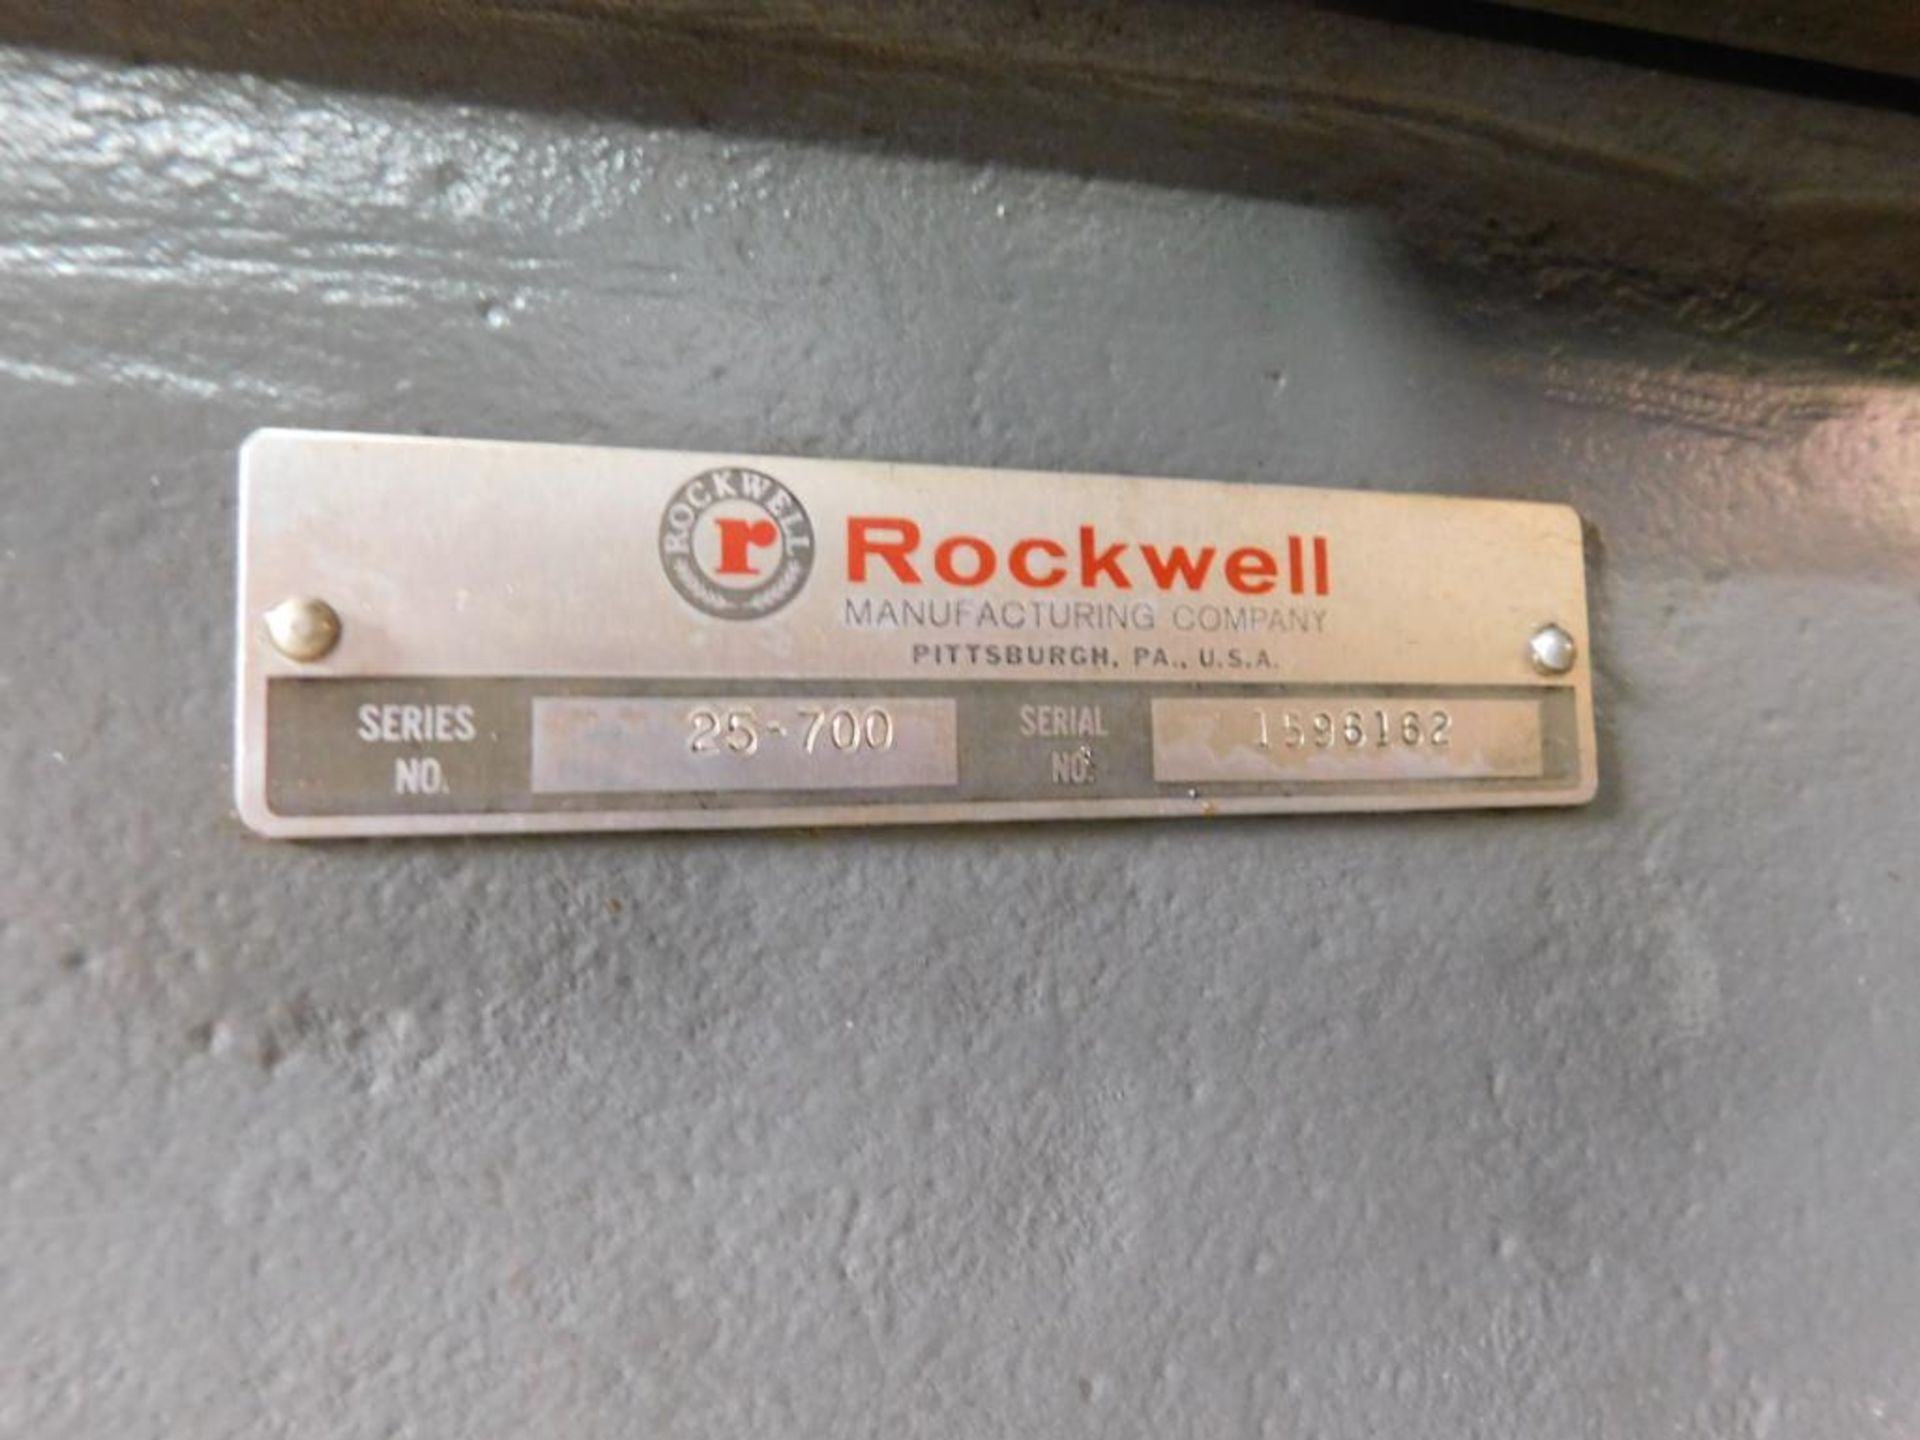 Rockwell 25-700 Lathe, S/N 1596162 6-3/4" Chuck, Tailstock, 1-1/4" Pipe Diameter, 10" Swing, 30" Dis - Image 13 of 13